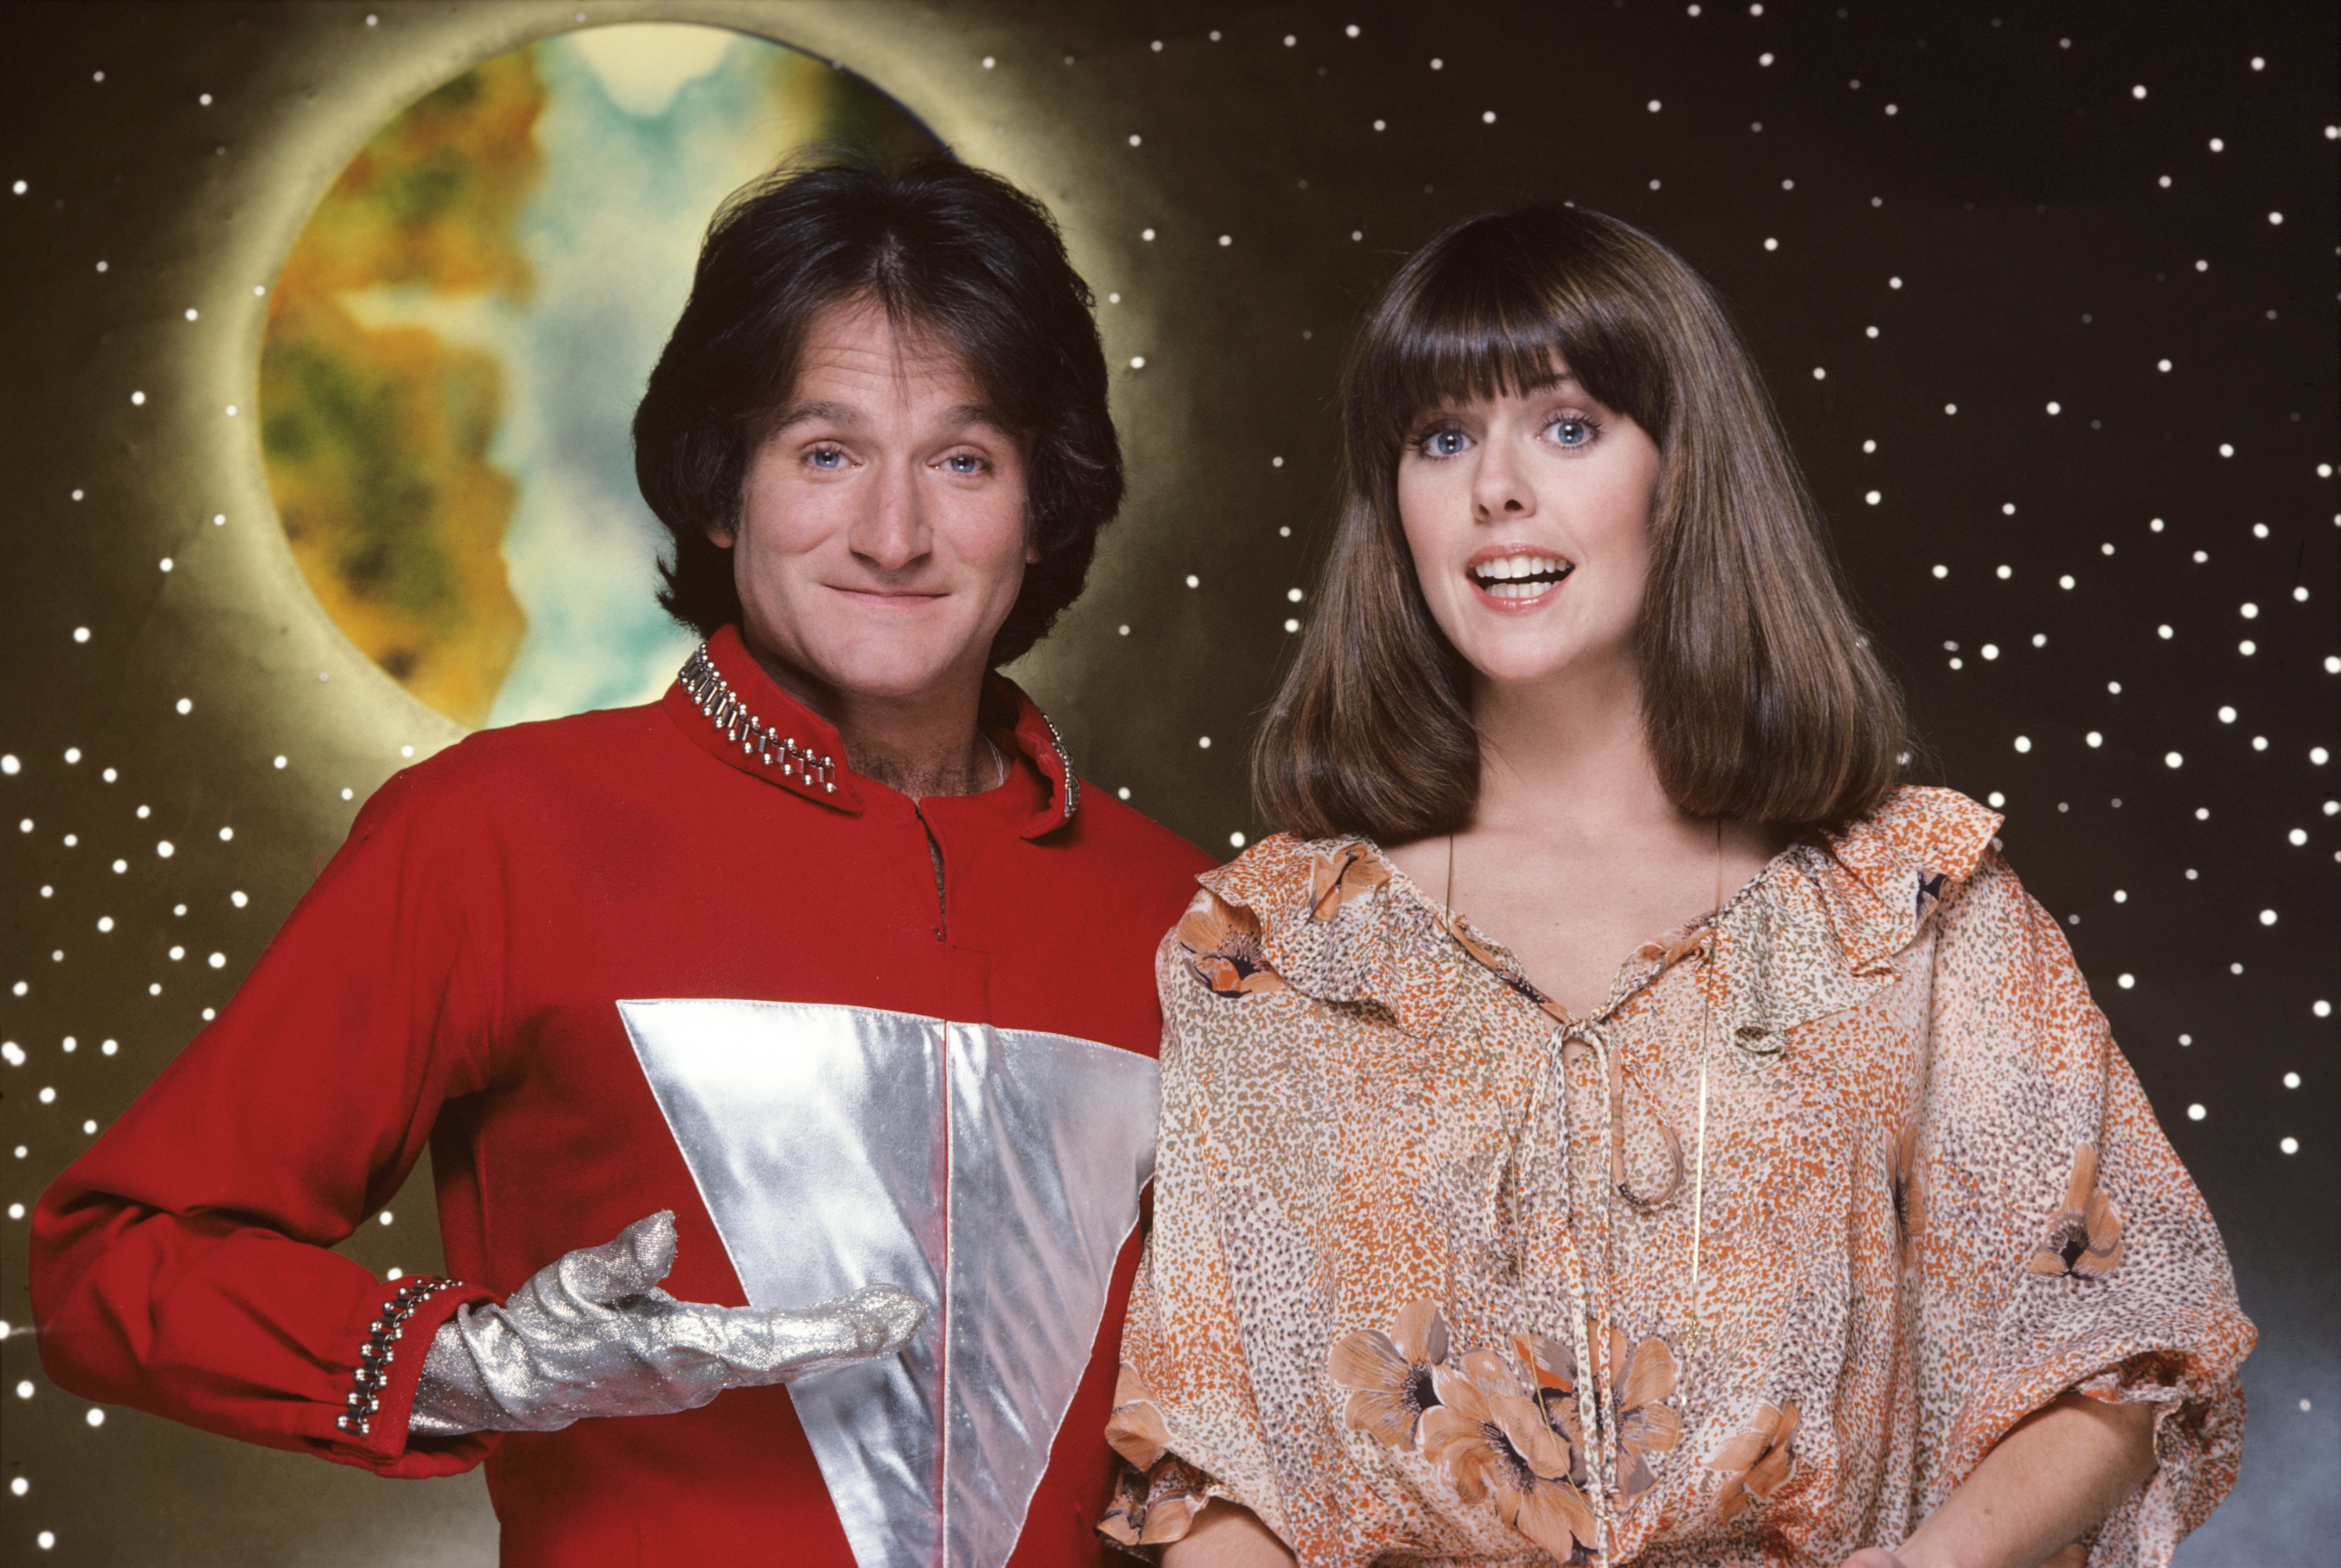 Robin Williams and Pam Dawber as Mork and Mindy in September 1978 | Source: Getty Images